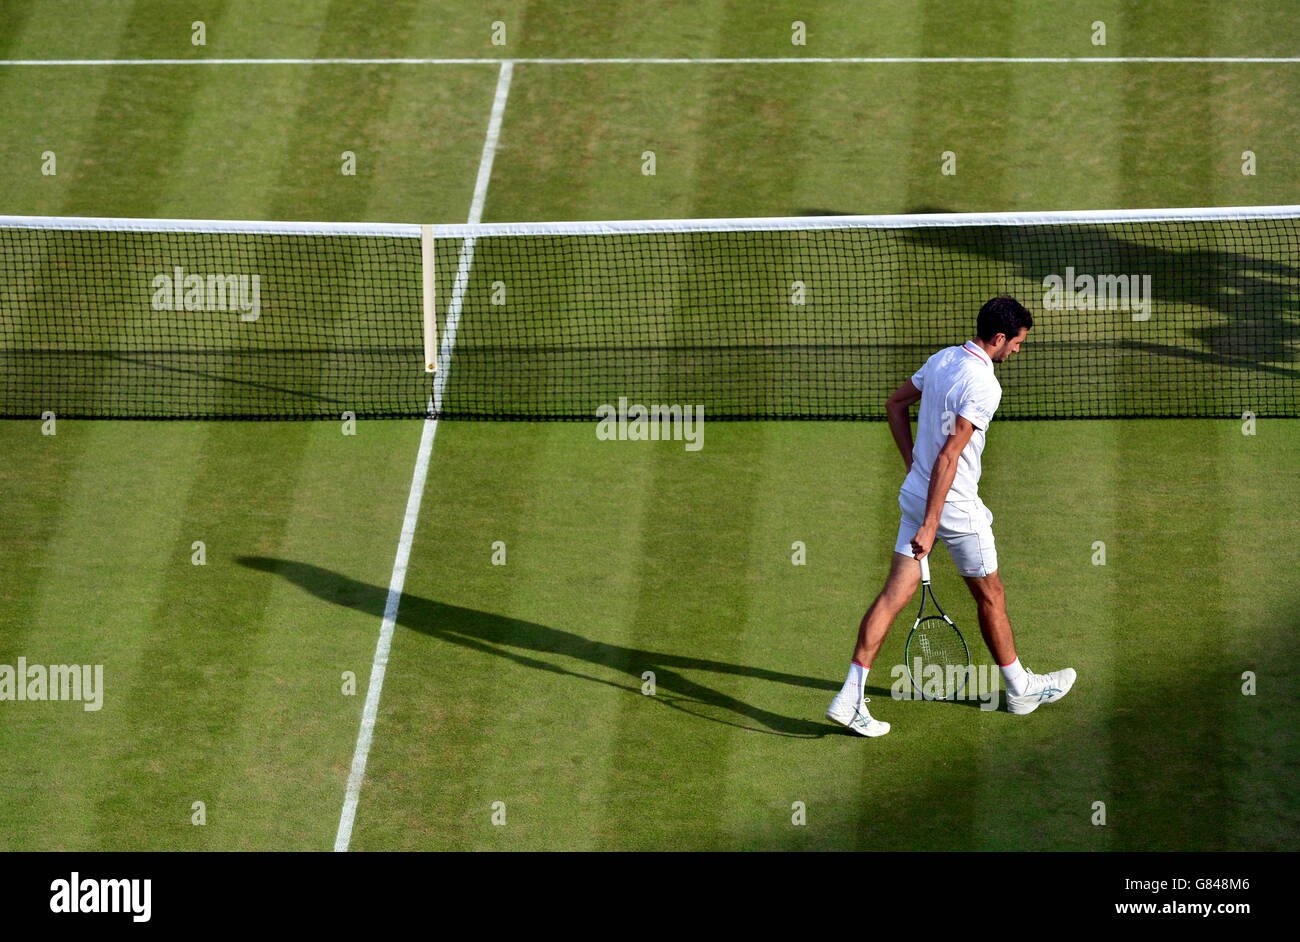 James Ward drops his serve against Vasek Pospisil during day Six of the Wimbledon Championships at the All England Lawn Tennis and Croquet Club, Wimbledon. Stock Photo